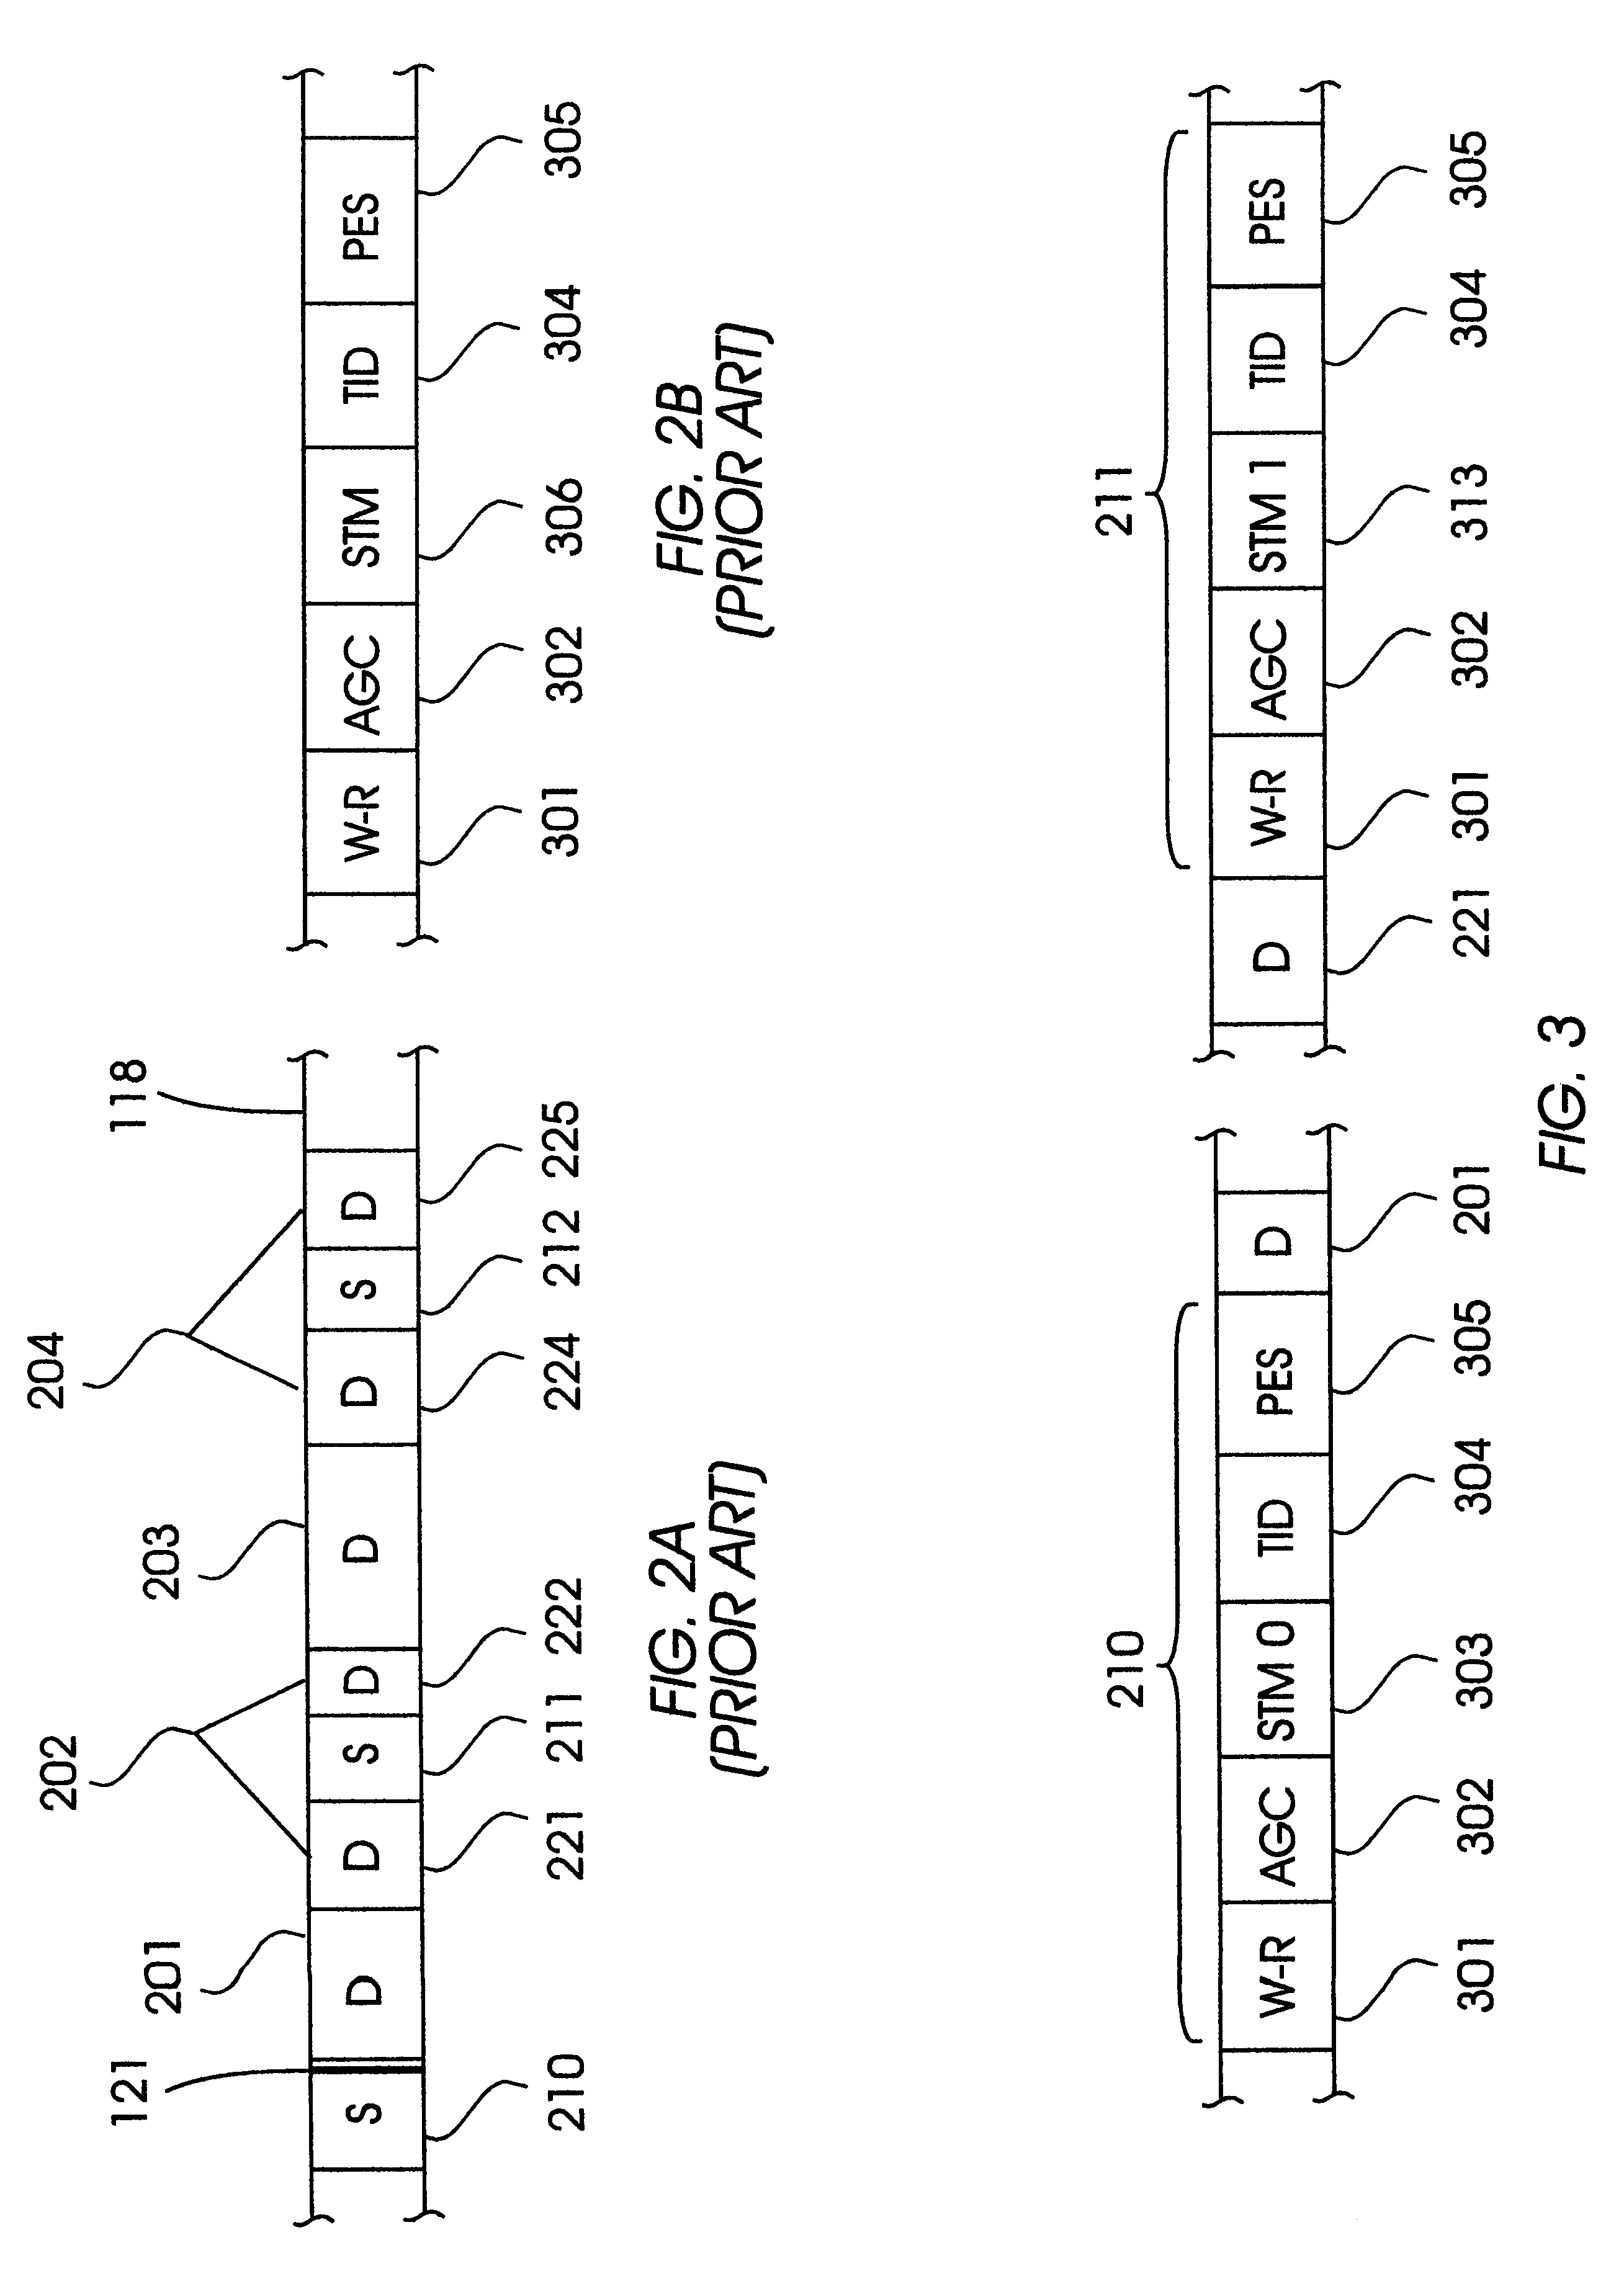 Disk drive with sector numbers encoded by sequences of sector types